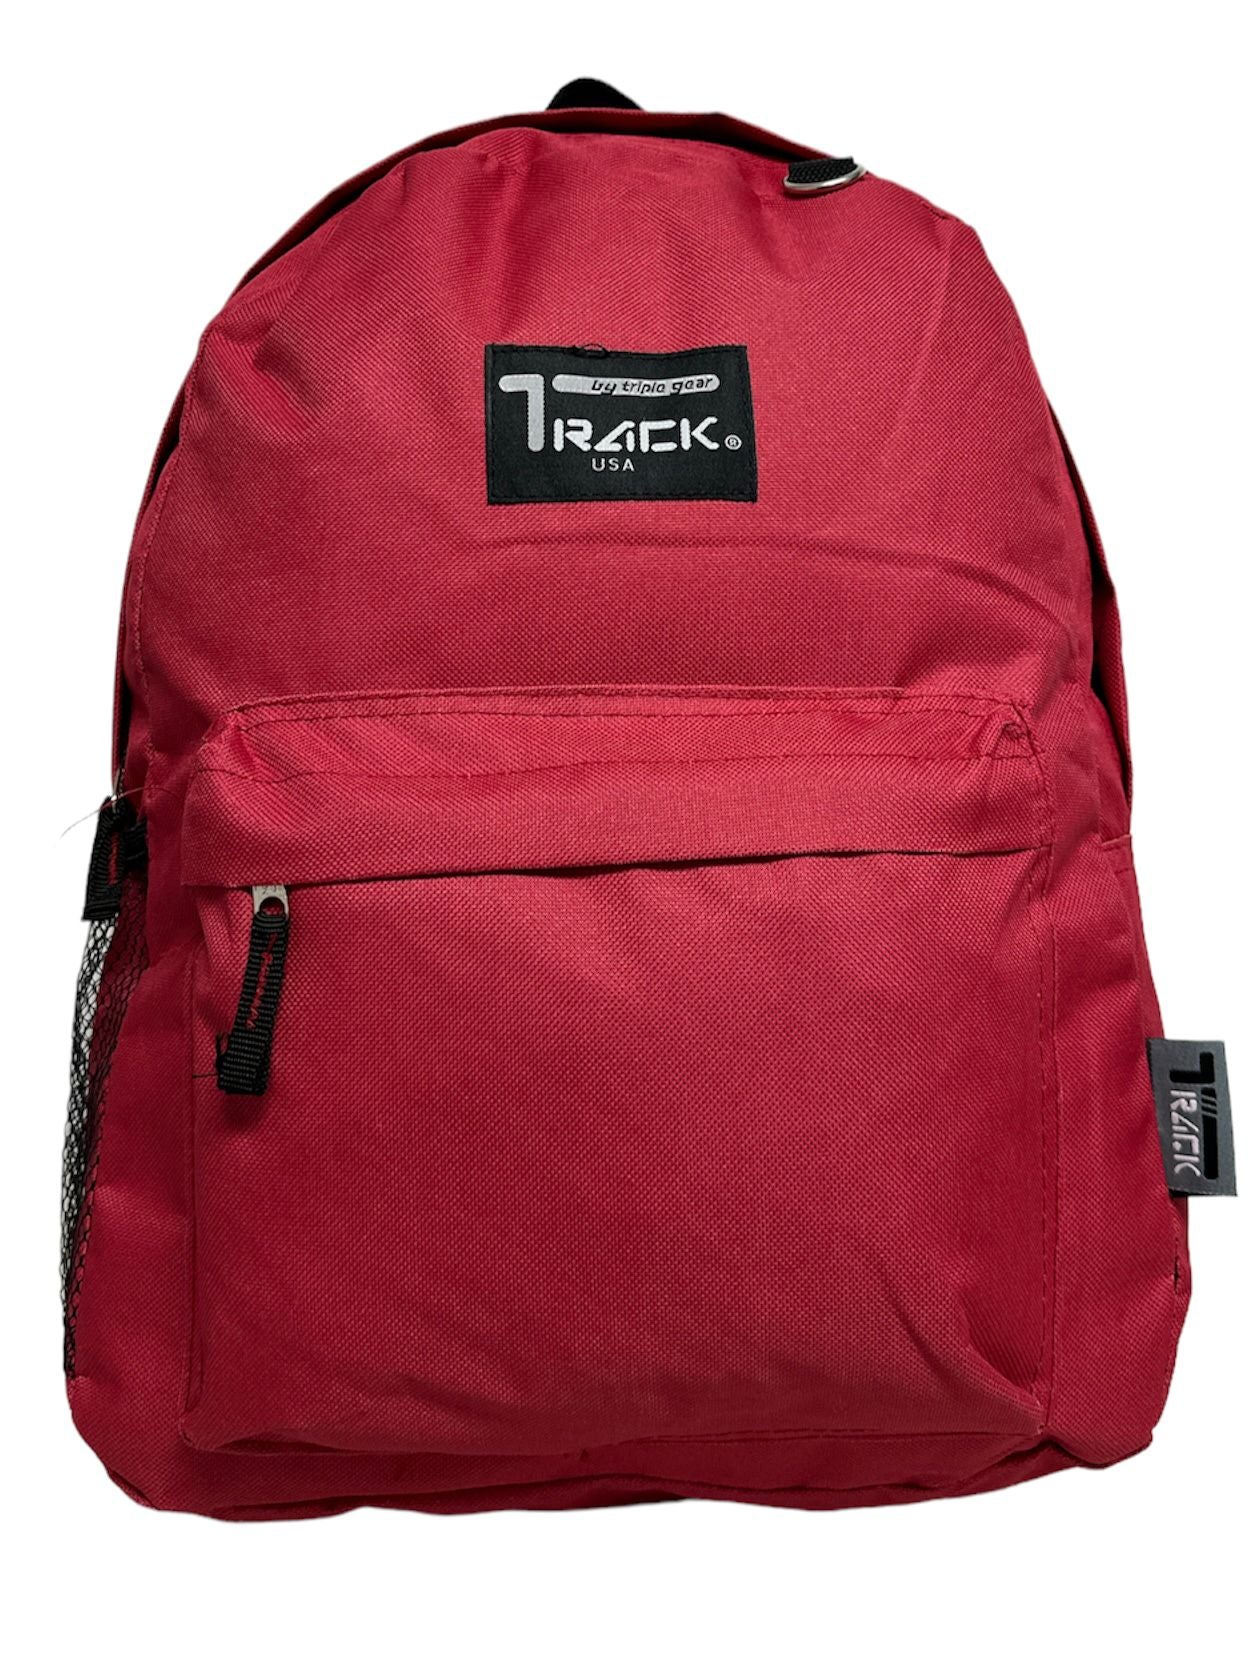 TB205 RED